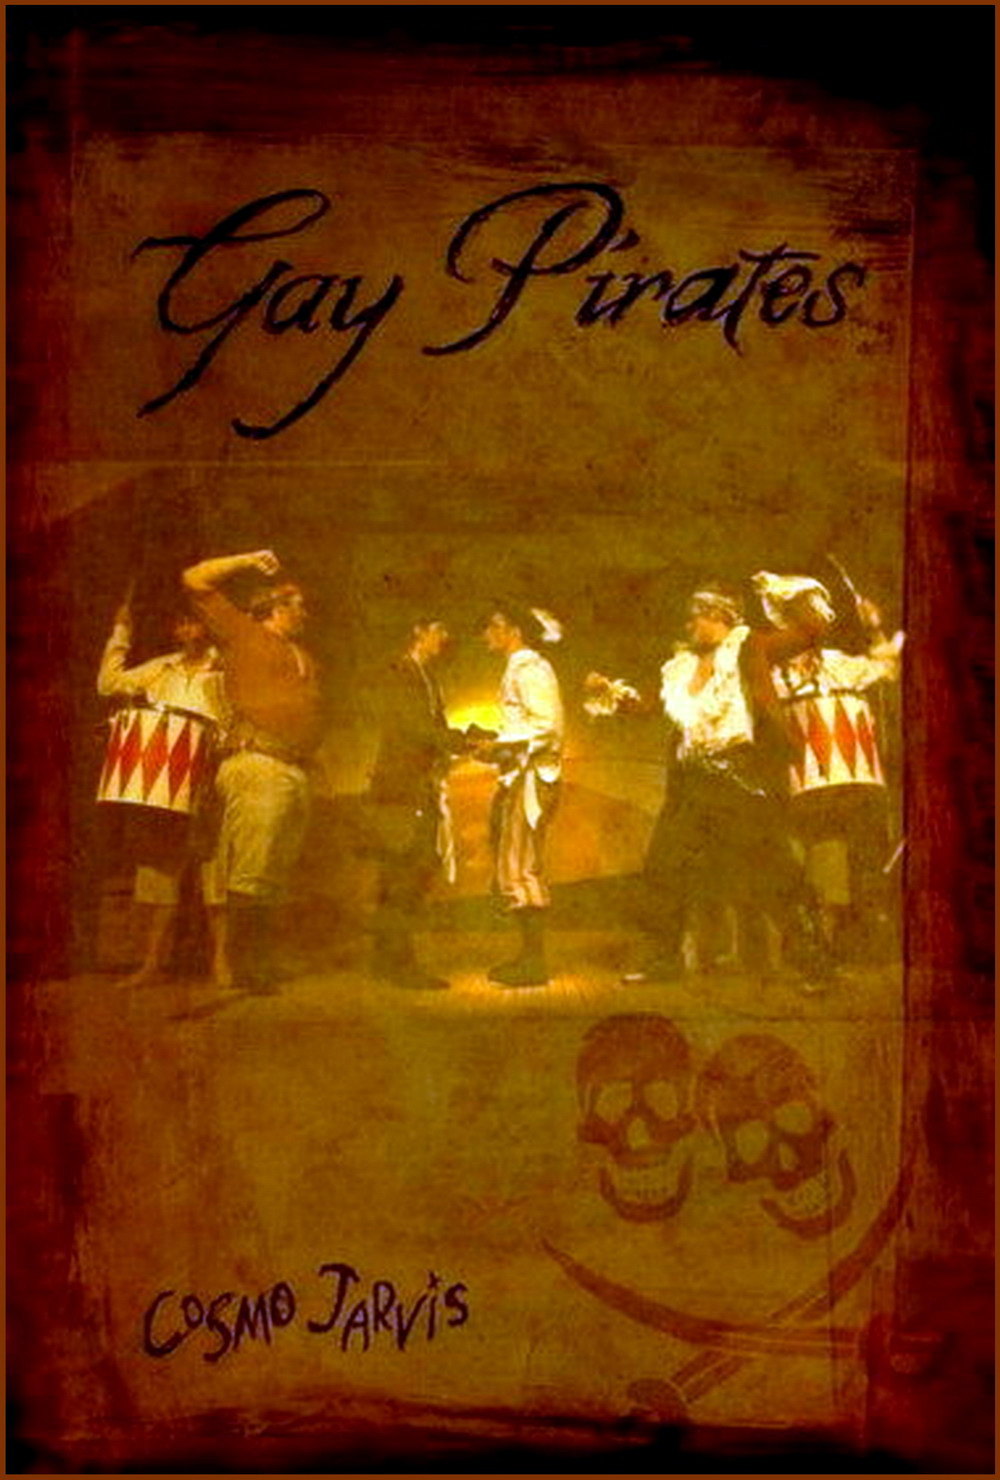 Gay Pirates (2011) Cosmo Jarvis